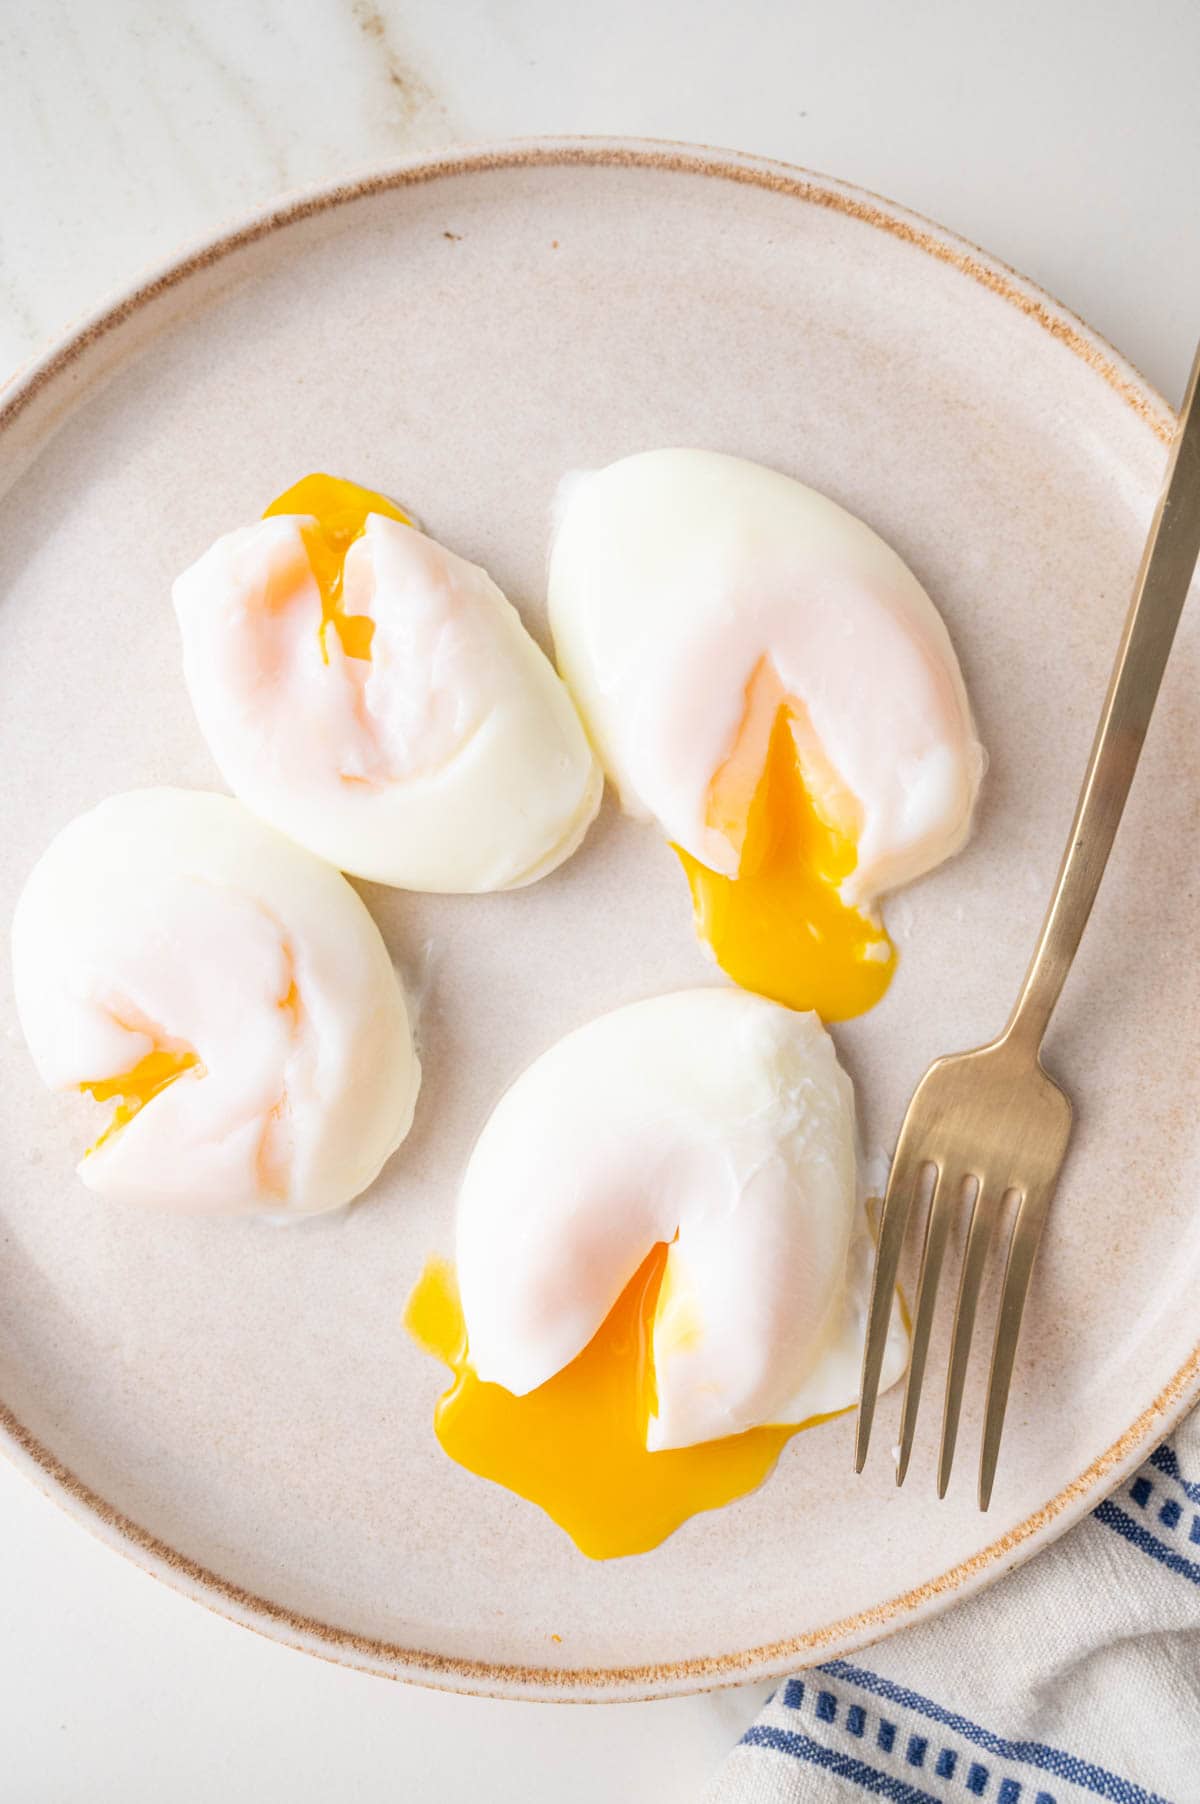 Four poached eggs with runny egg yolks on a beige plate. Gold fork on the side.